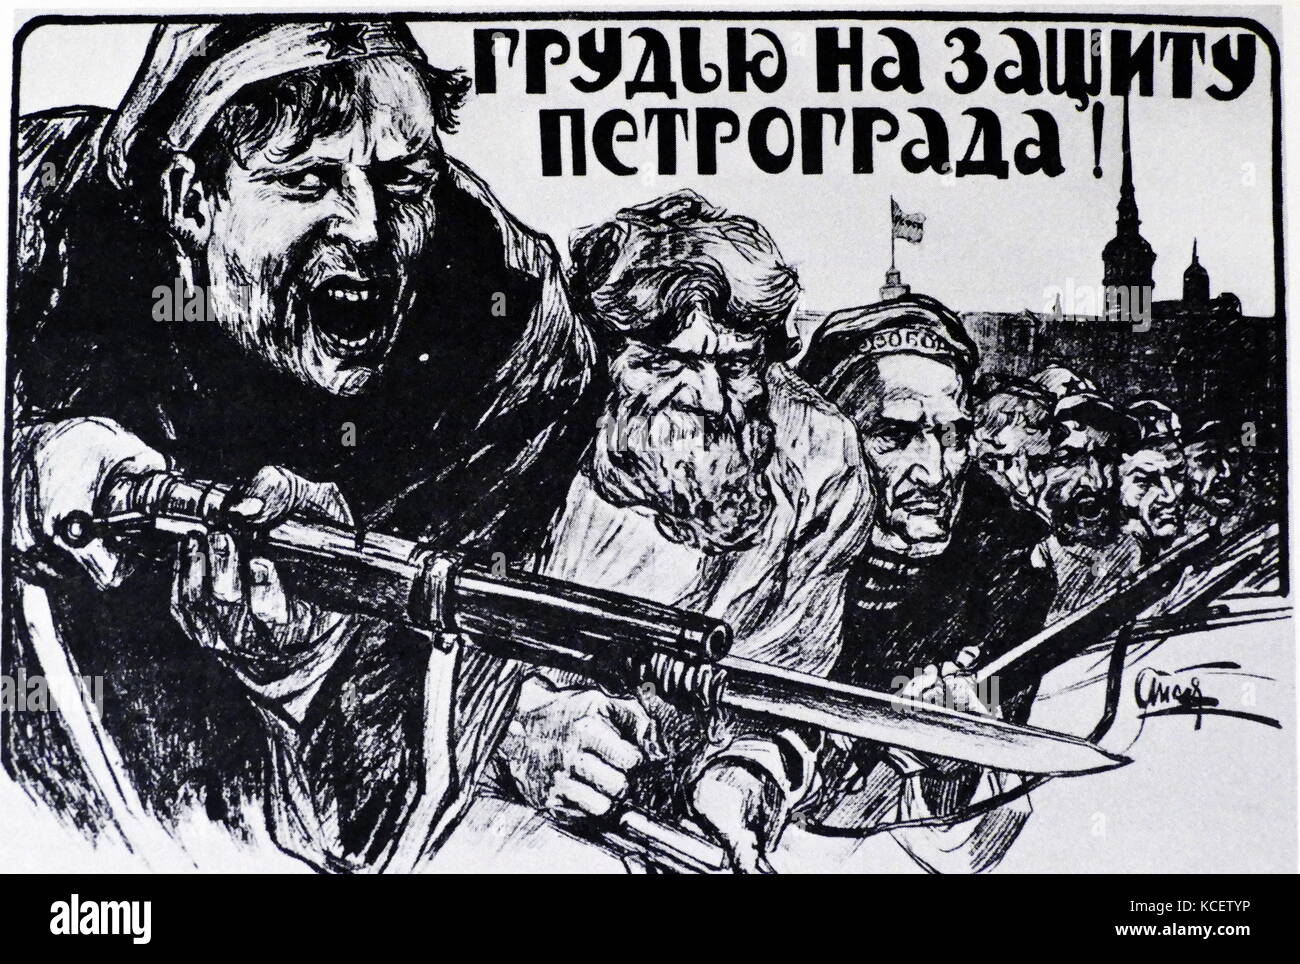 Bolshevik communist propaganda poster of the Russian Civil War period 1918-21. For the defence of Petrograd (St Petersburg); Shoulder to shoulder! Exhorts the slogan on the poster. Stock Photo